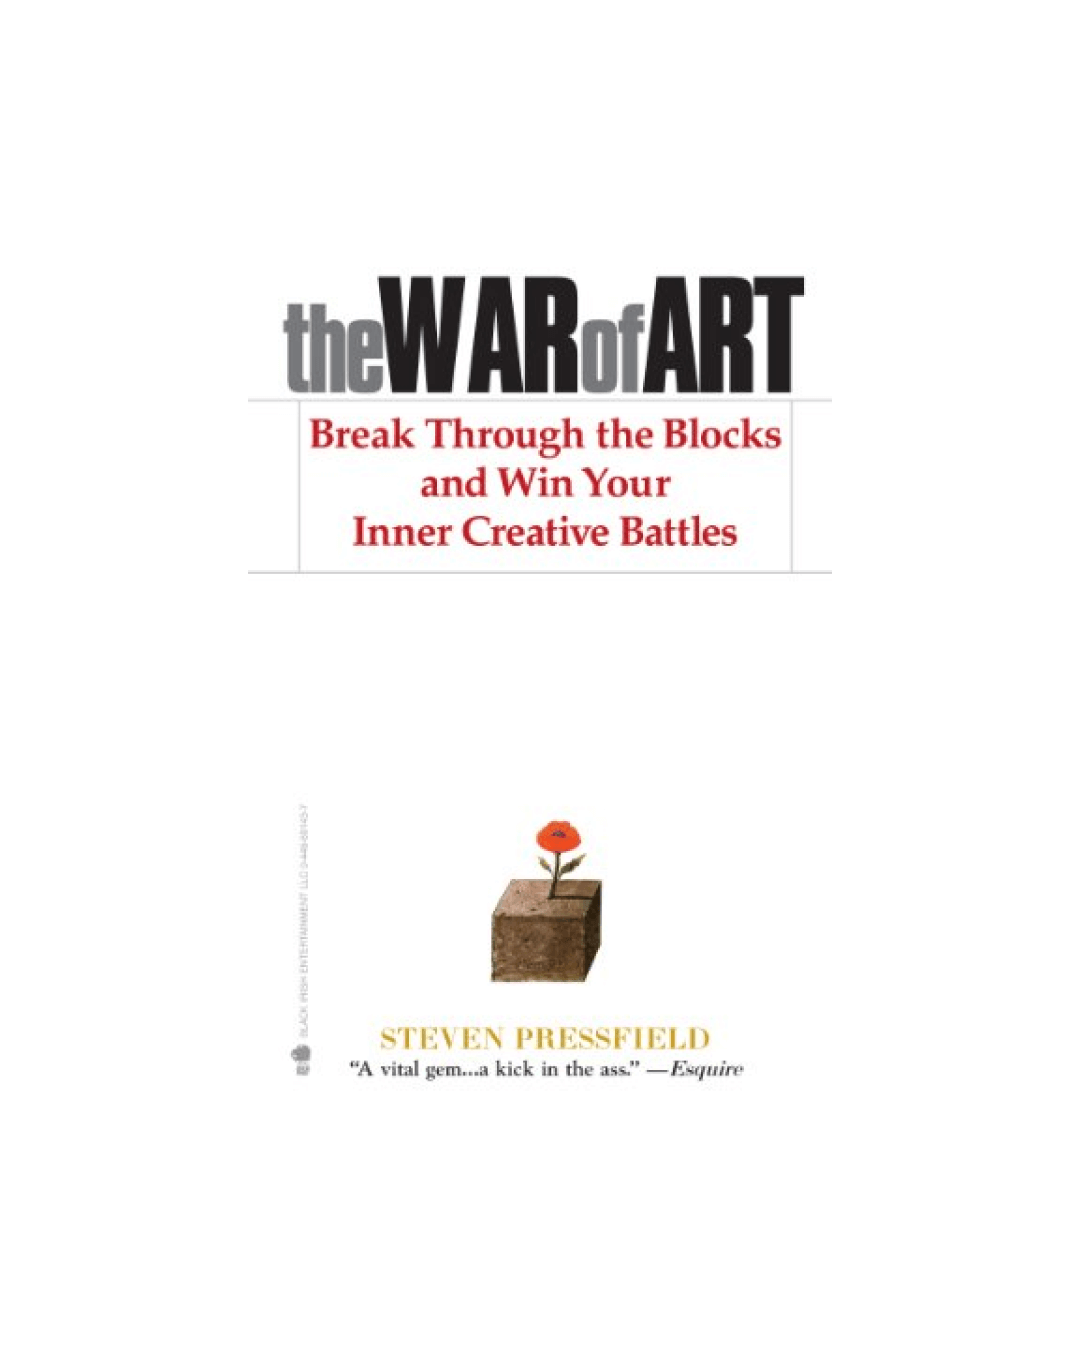 The War of Art book cover